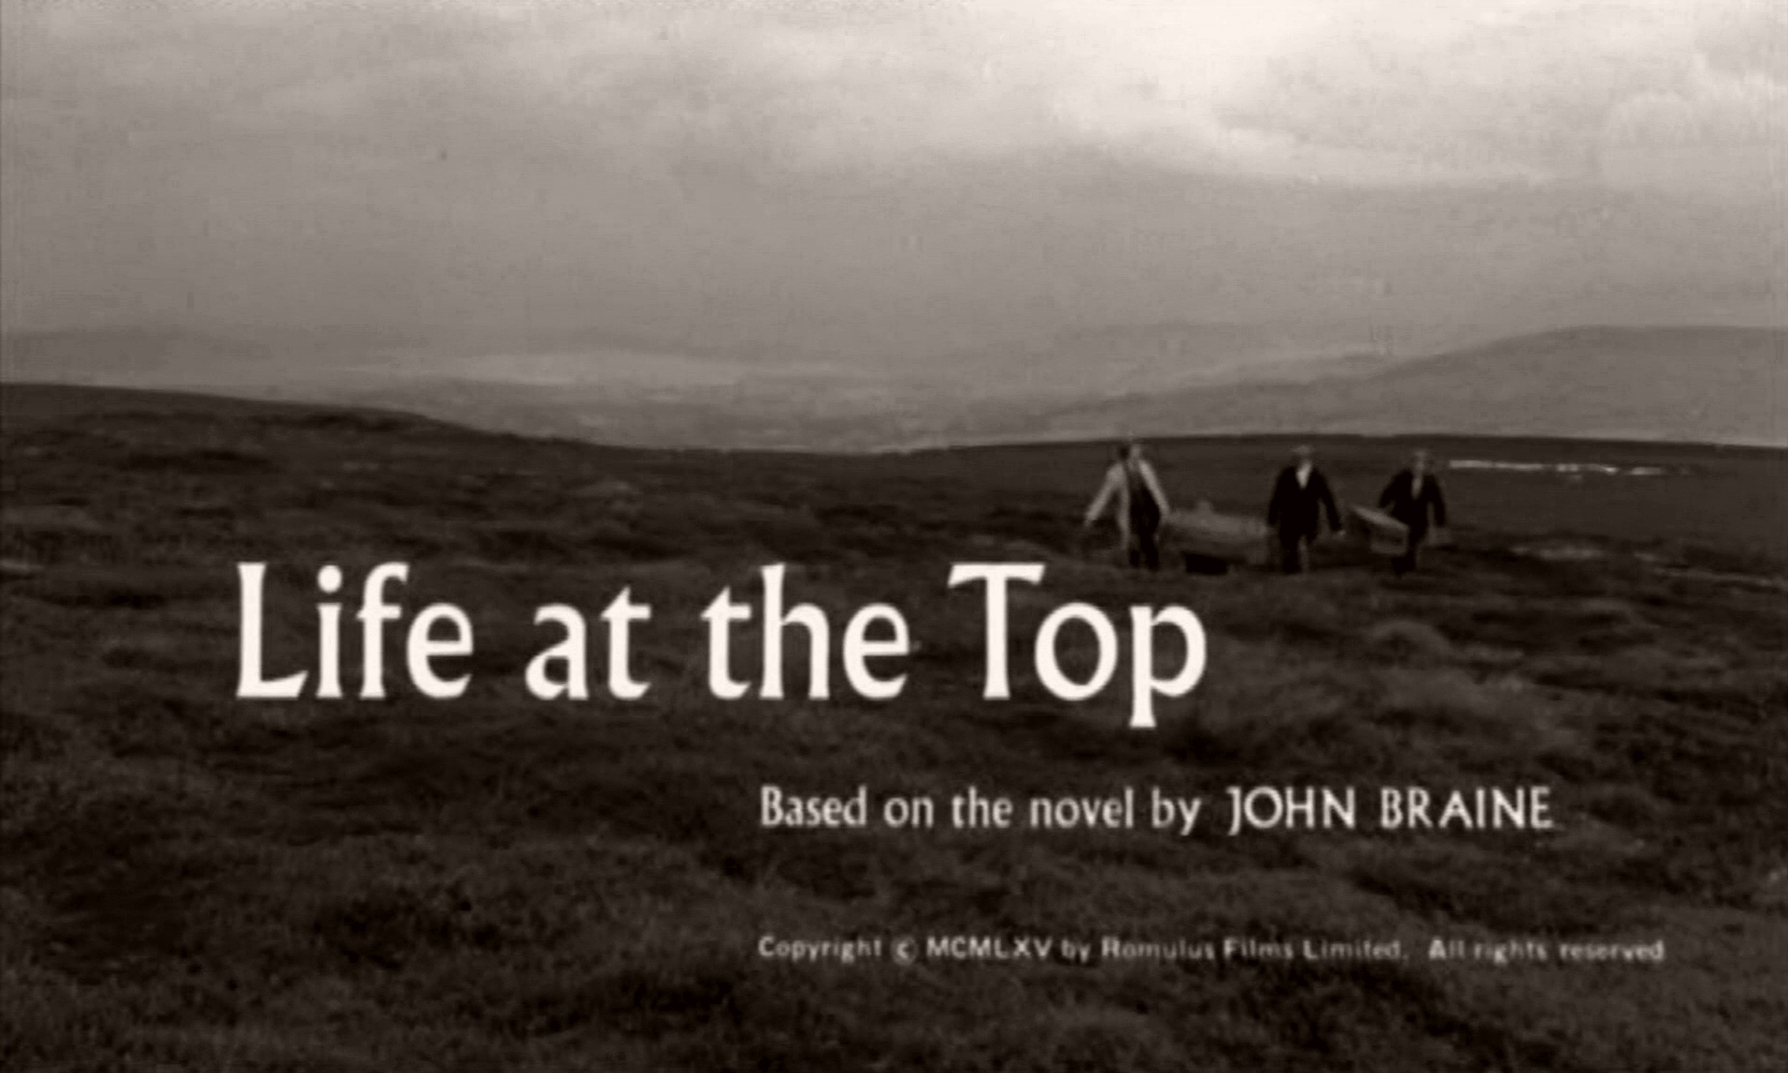 Main title from Life at the Top (1965) (5)  Based on the novel by John Braine  Copyright 1965 by Romulus Films Limited  All rights reserved